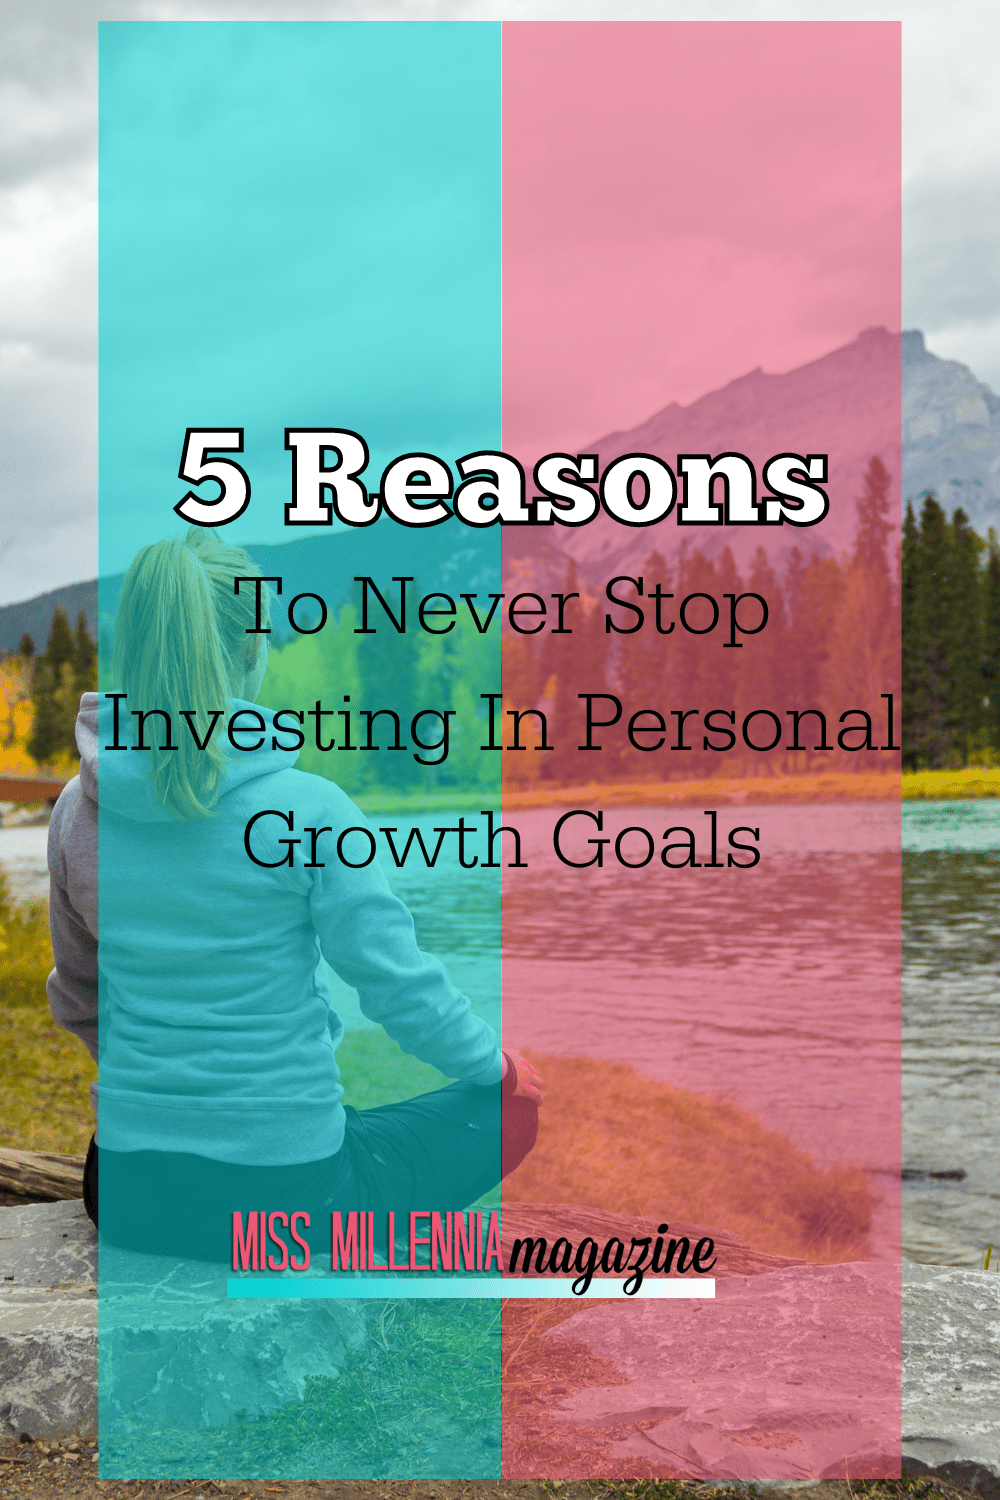 5 Reasons To Never Stop Investing In Your Personal Growth Goals